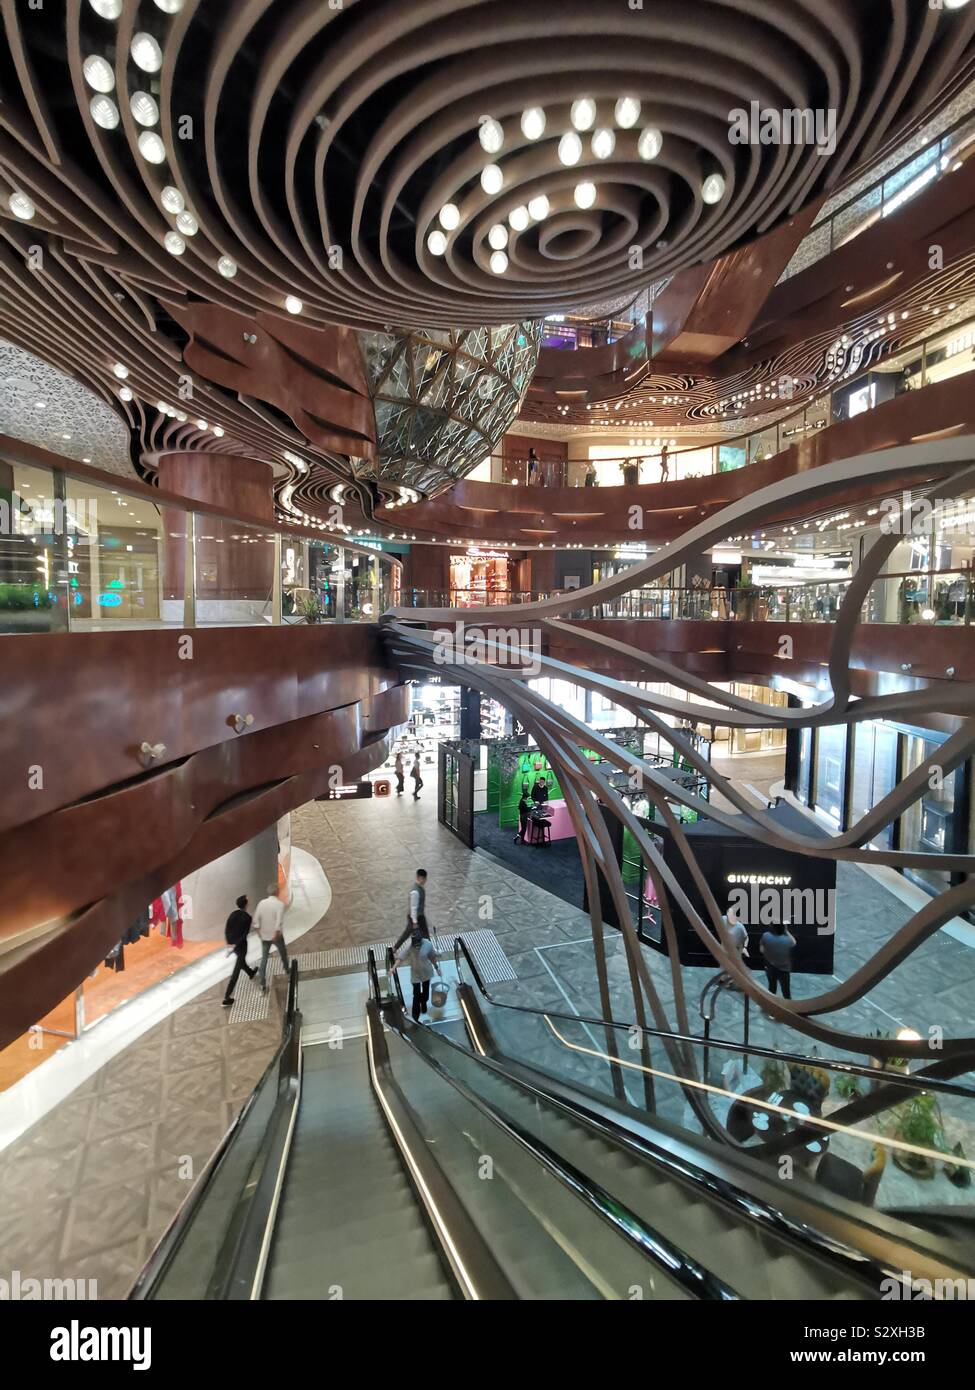 The new k11 Musea shopping mall in Kowloon ,Hong Kong Stock Photo - Alamy